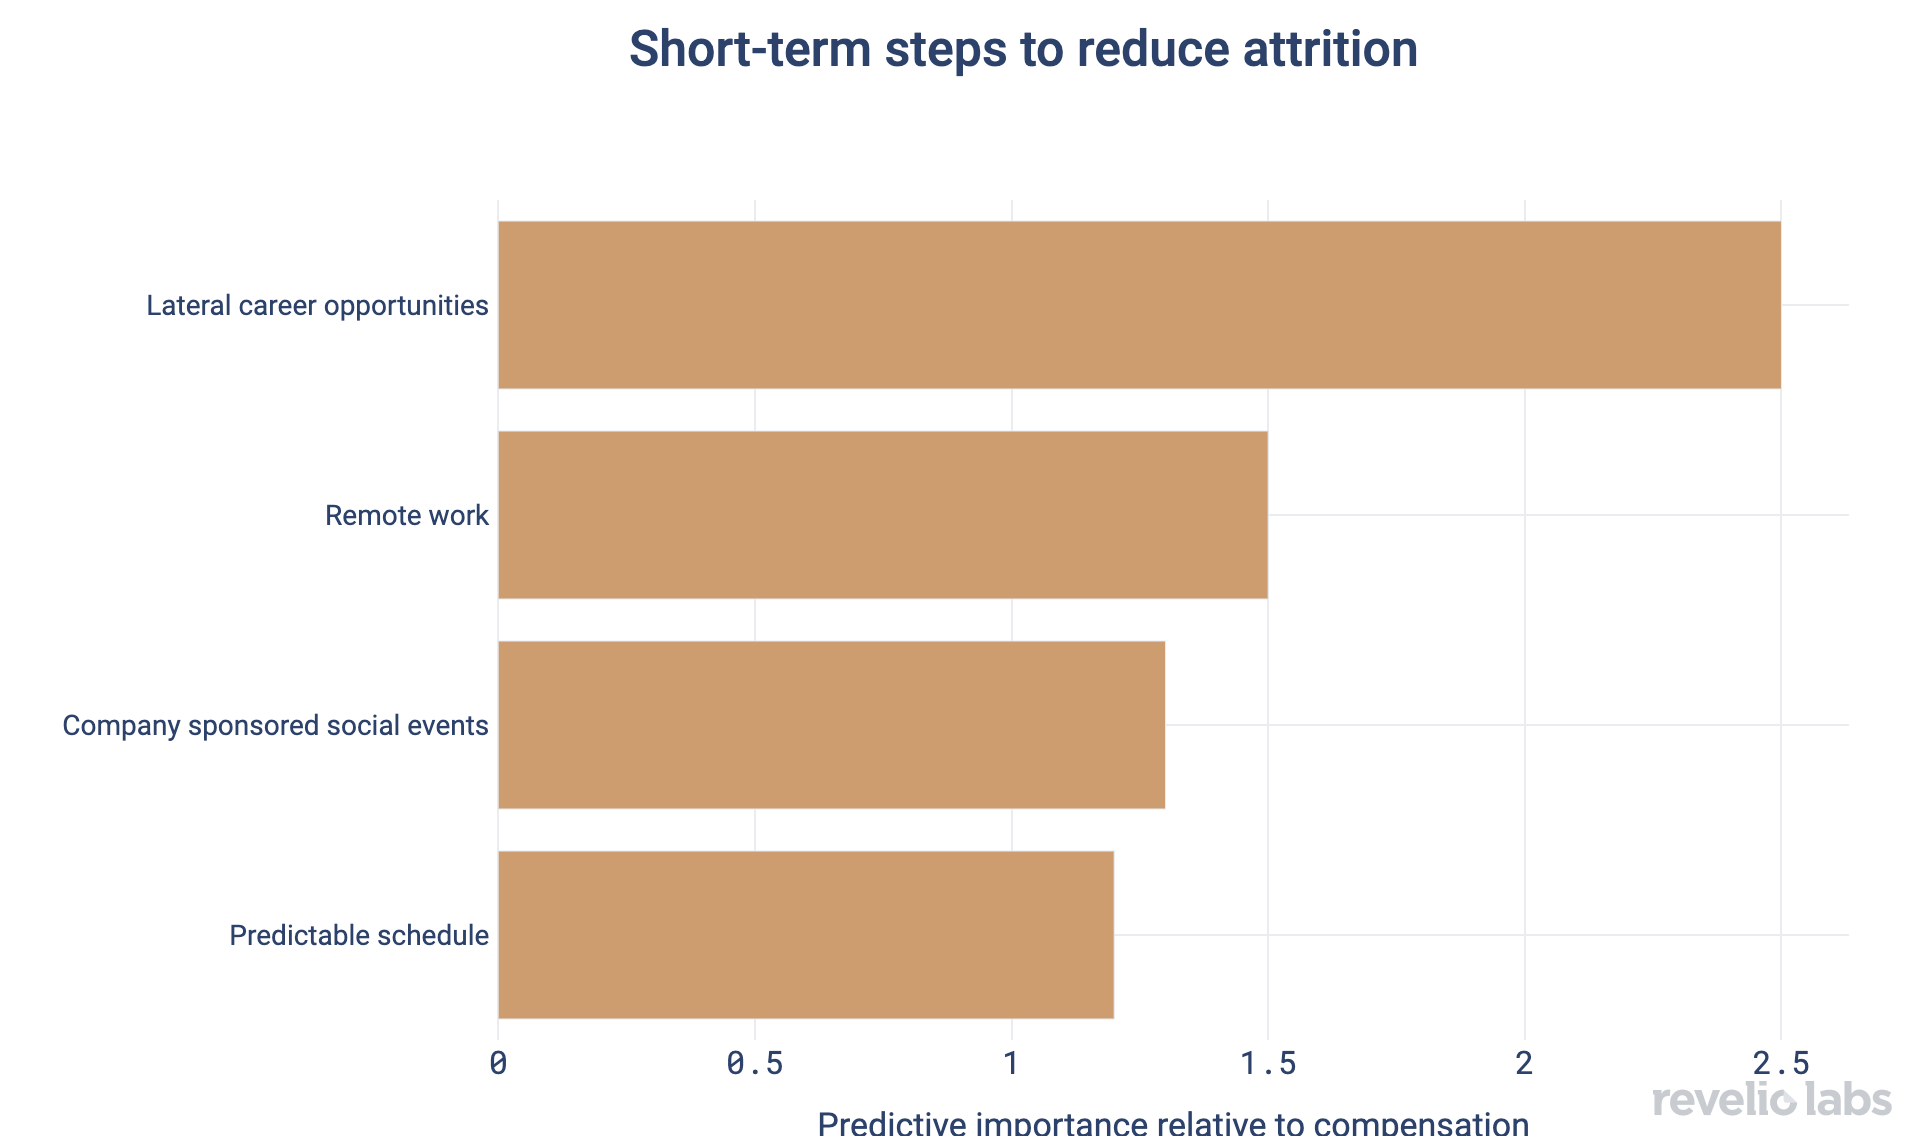 Short-term steps to reduce attrition